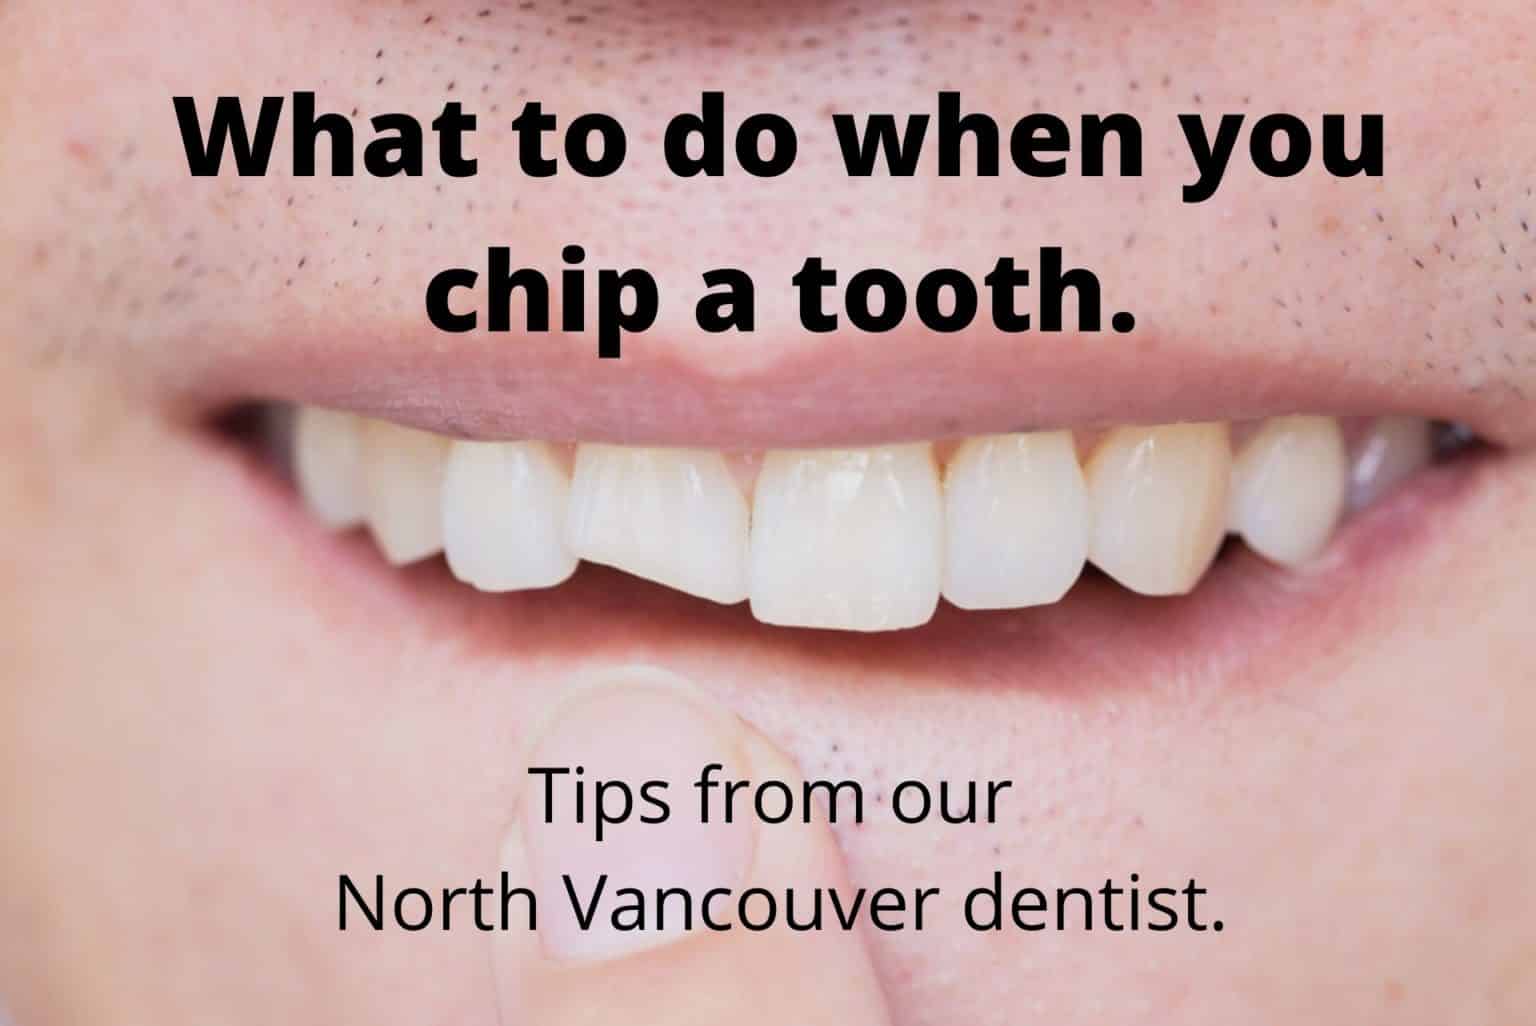 Chipped Tooth? Act Fast to Minimize Your Treatment Needs - Pier Dental